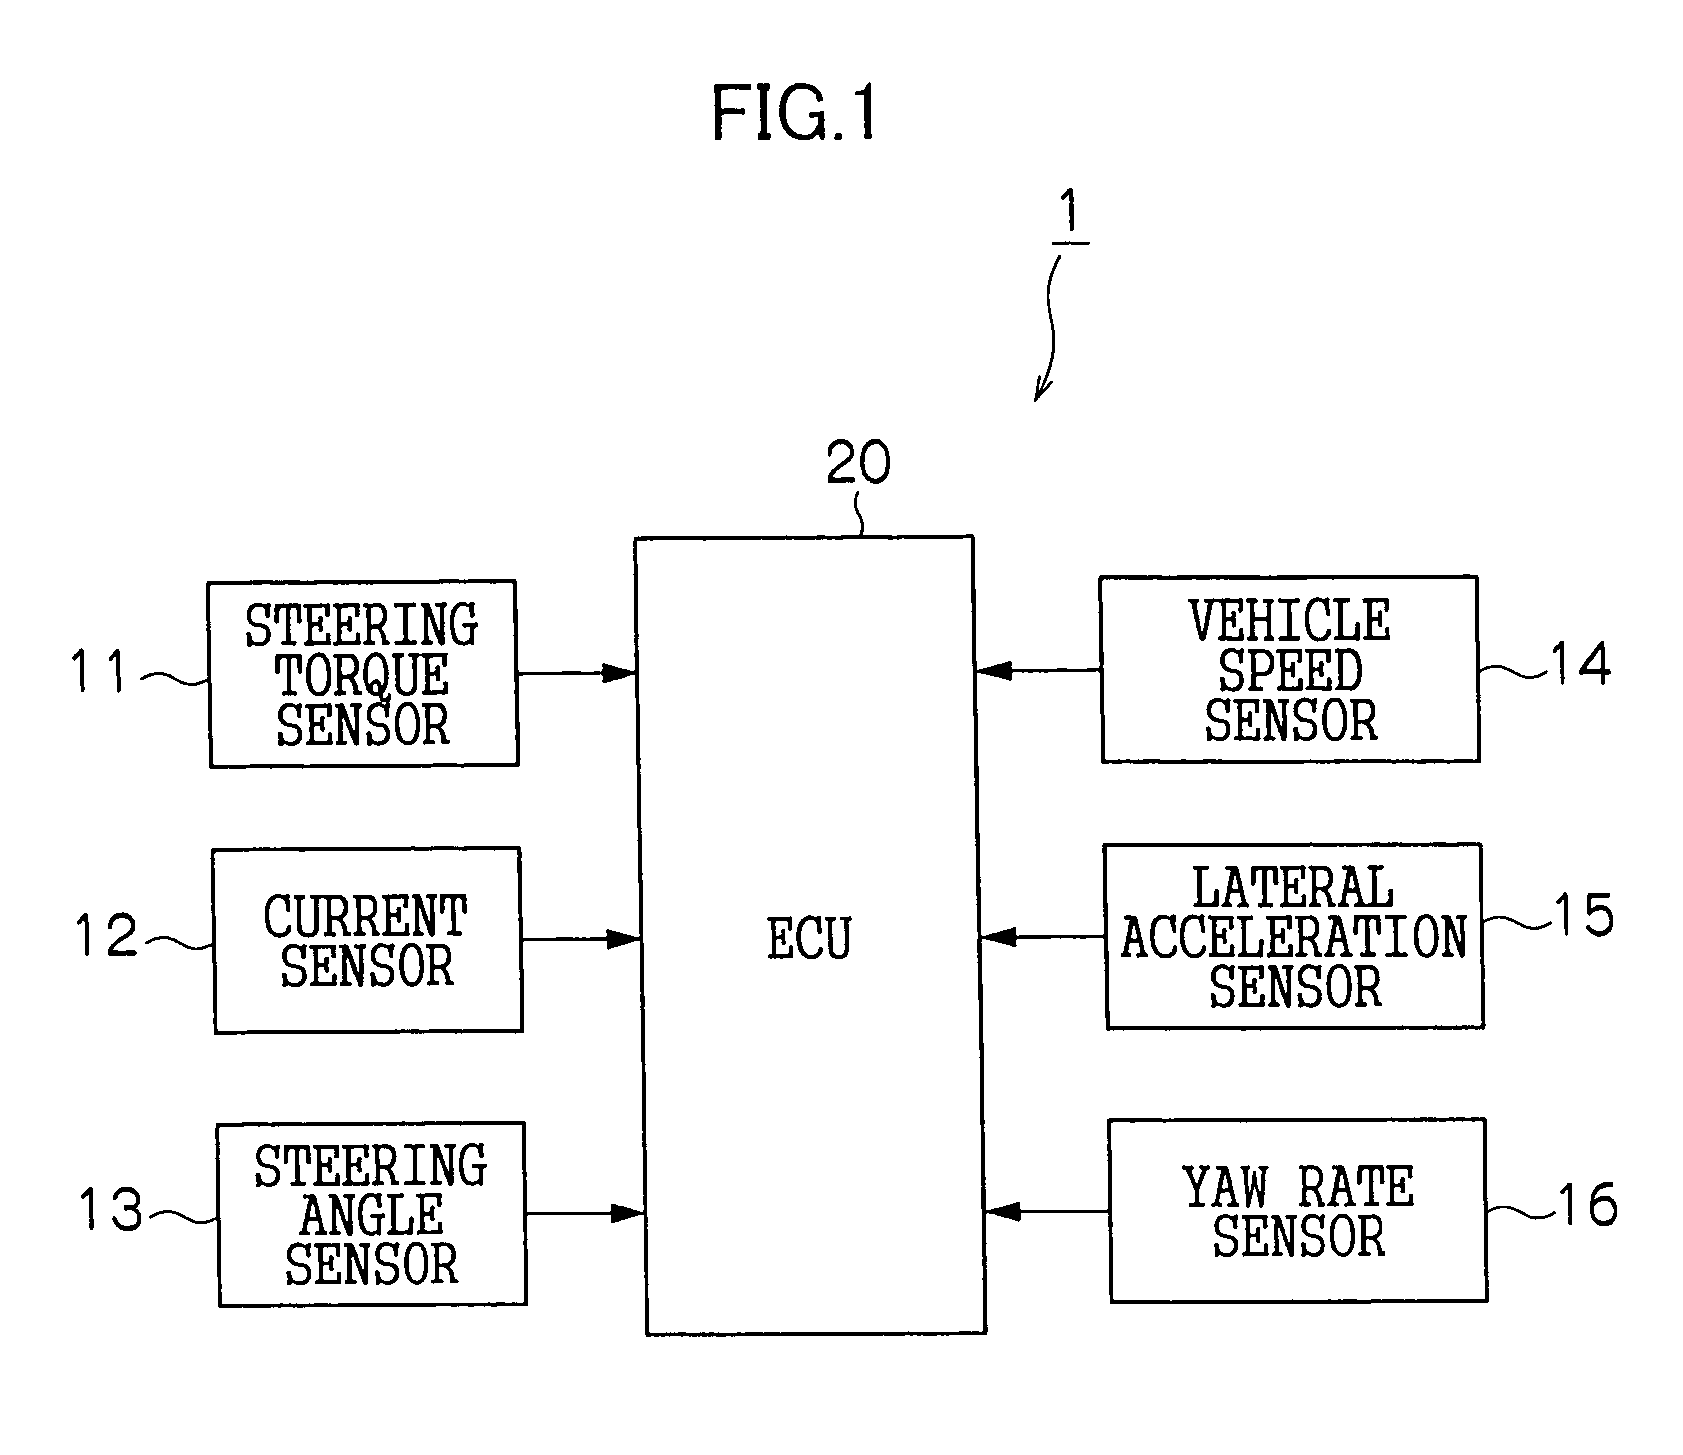 Device for estimating drift amount of lateral acceleration sensor, device for correcting output of lateral acceleration sensor, and device for estimating road surface friction state